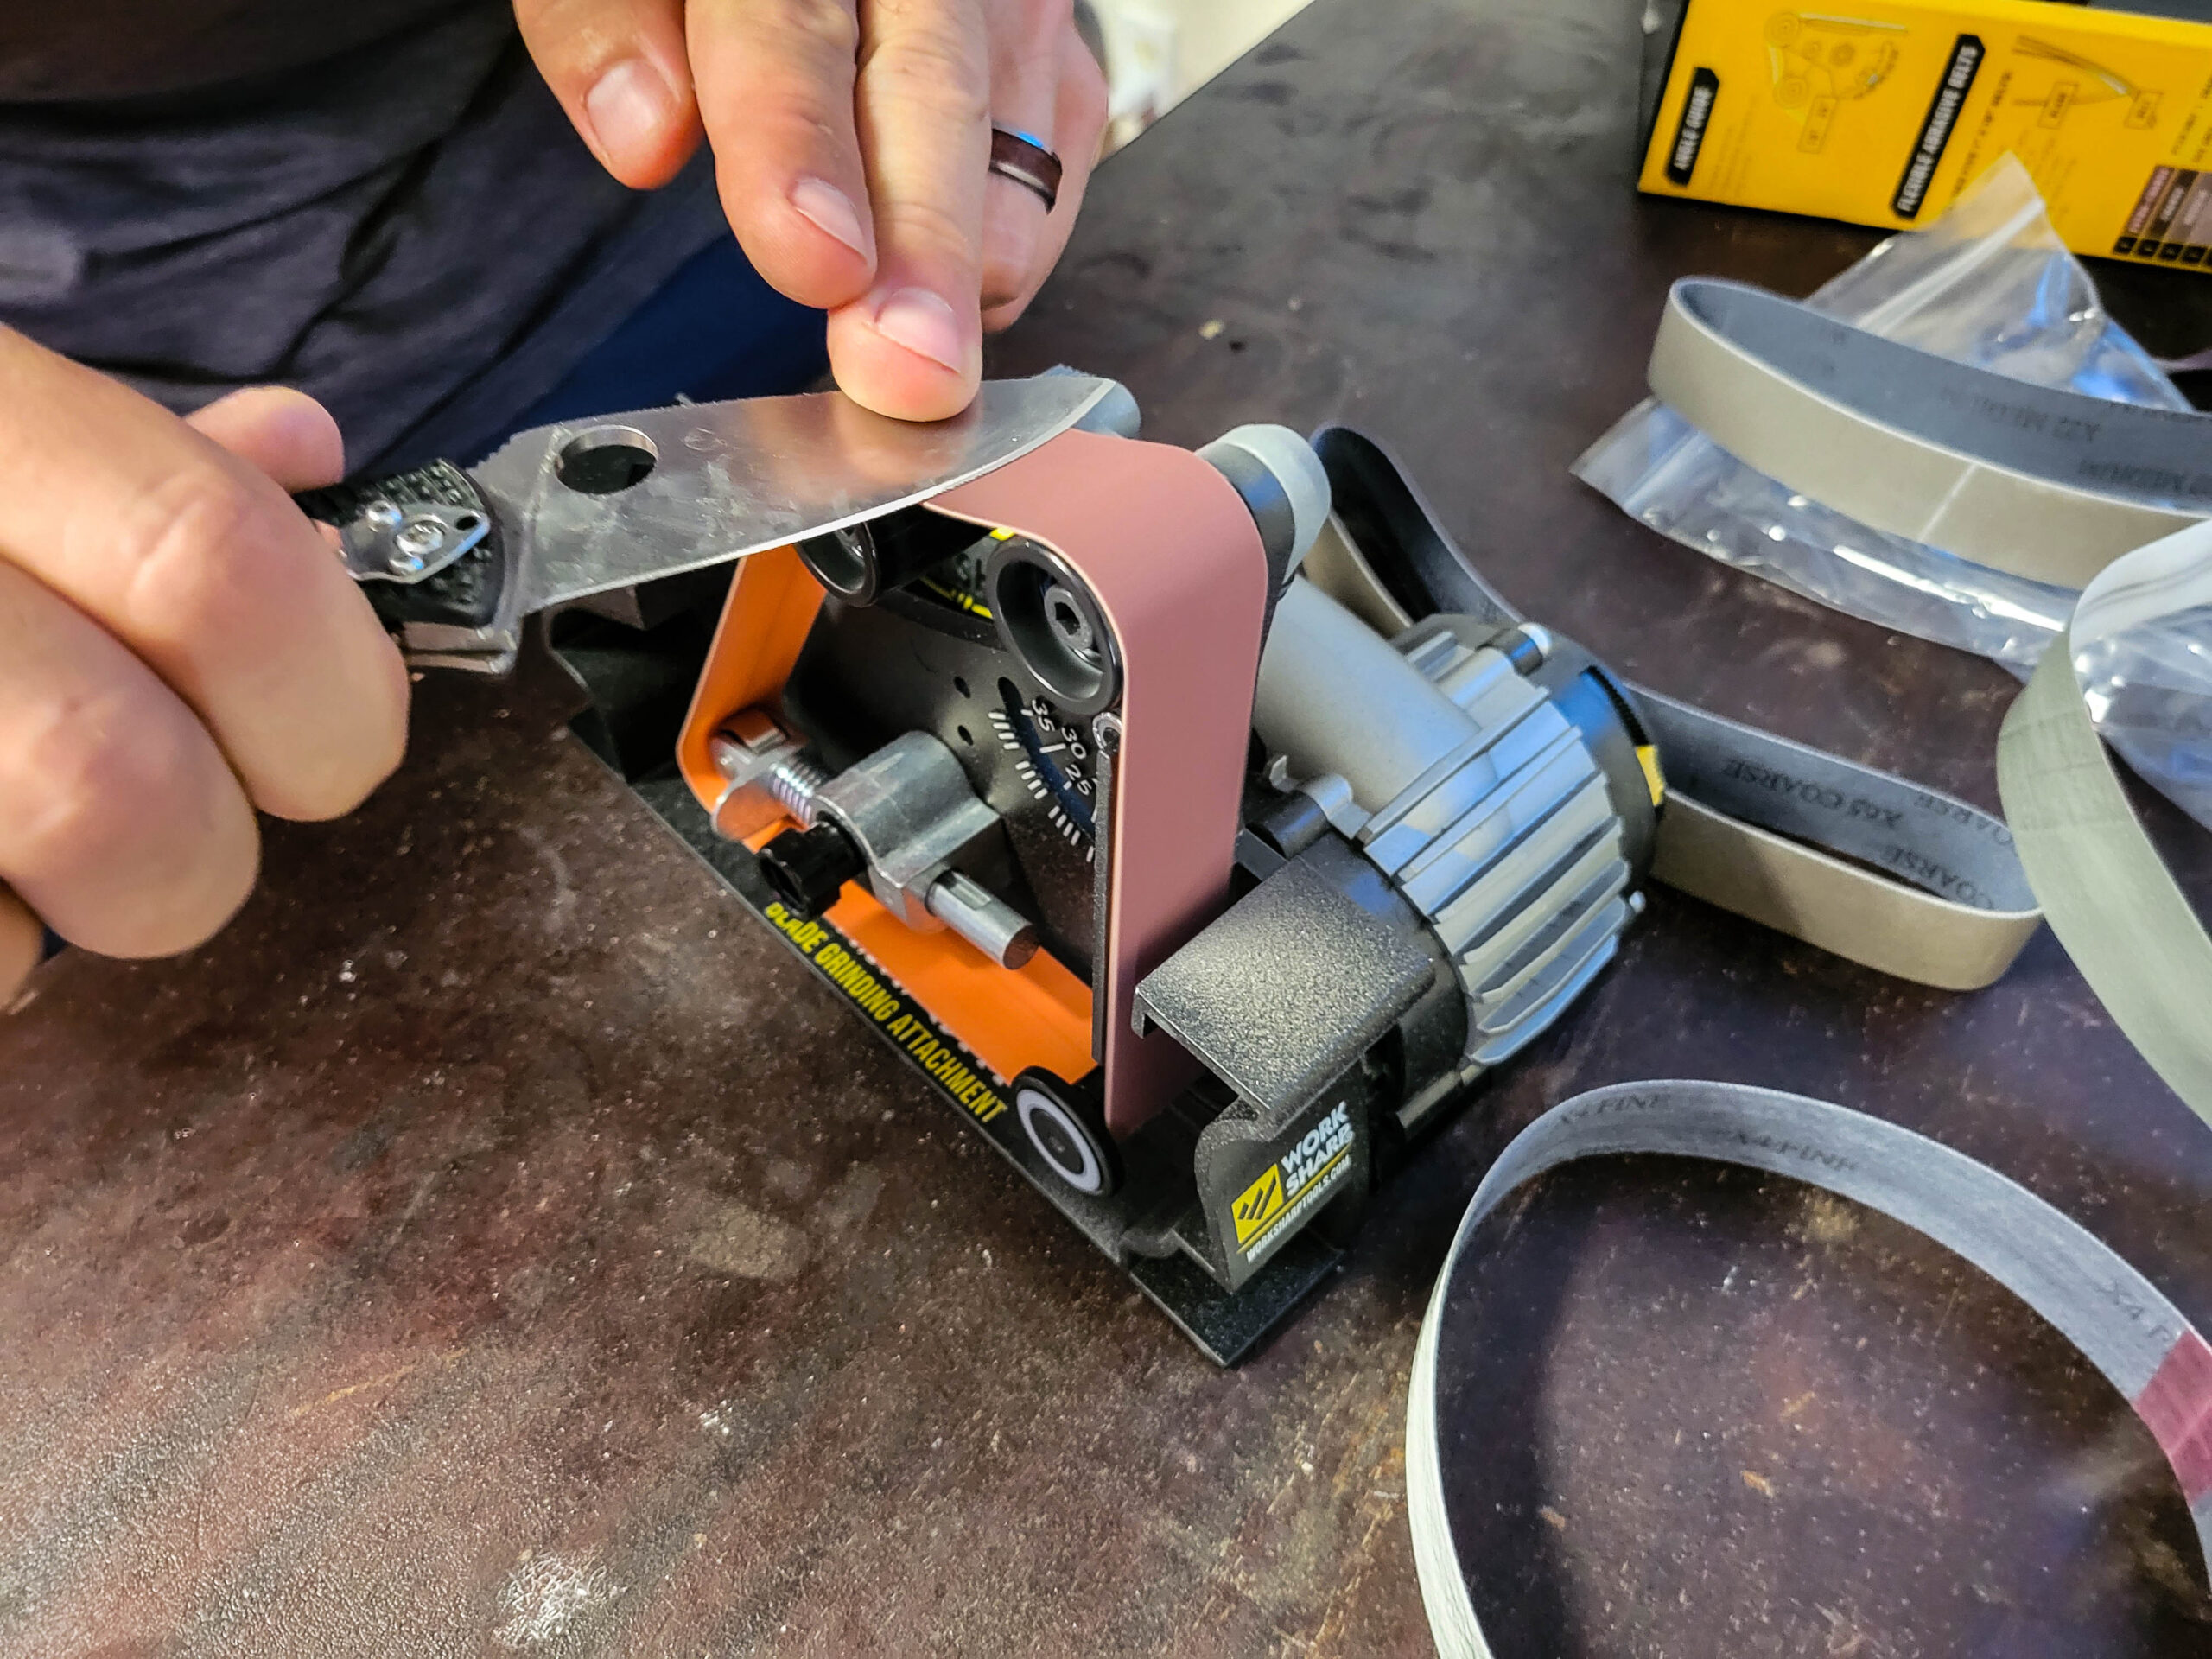 https://www.outdoorlife.com/wp-content/uploads/2023/08/18/electric-sharpeners-4-scaled.jpg